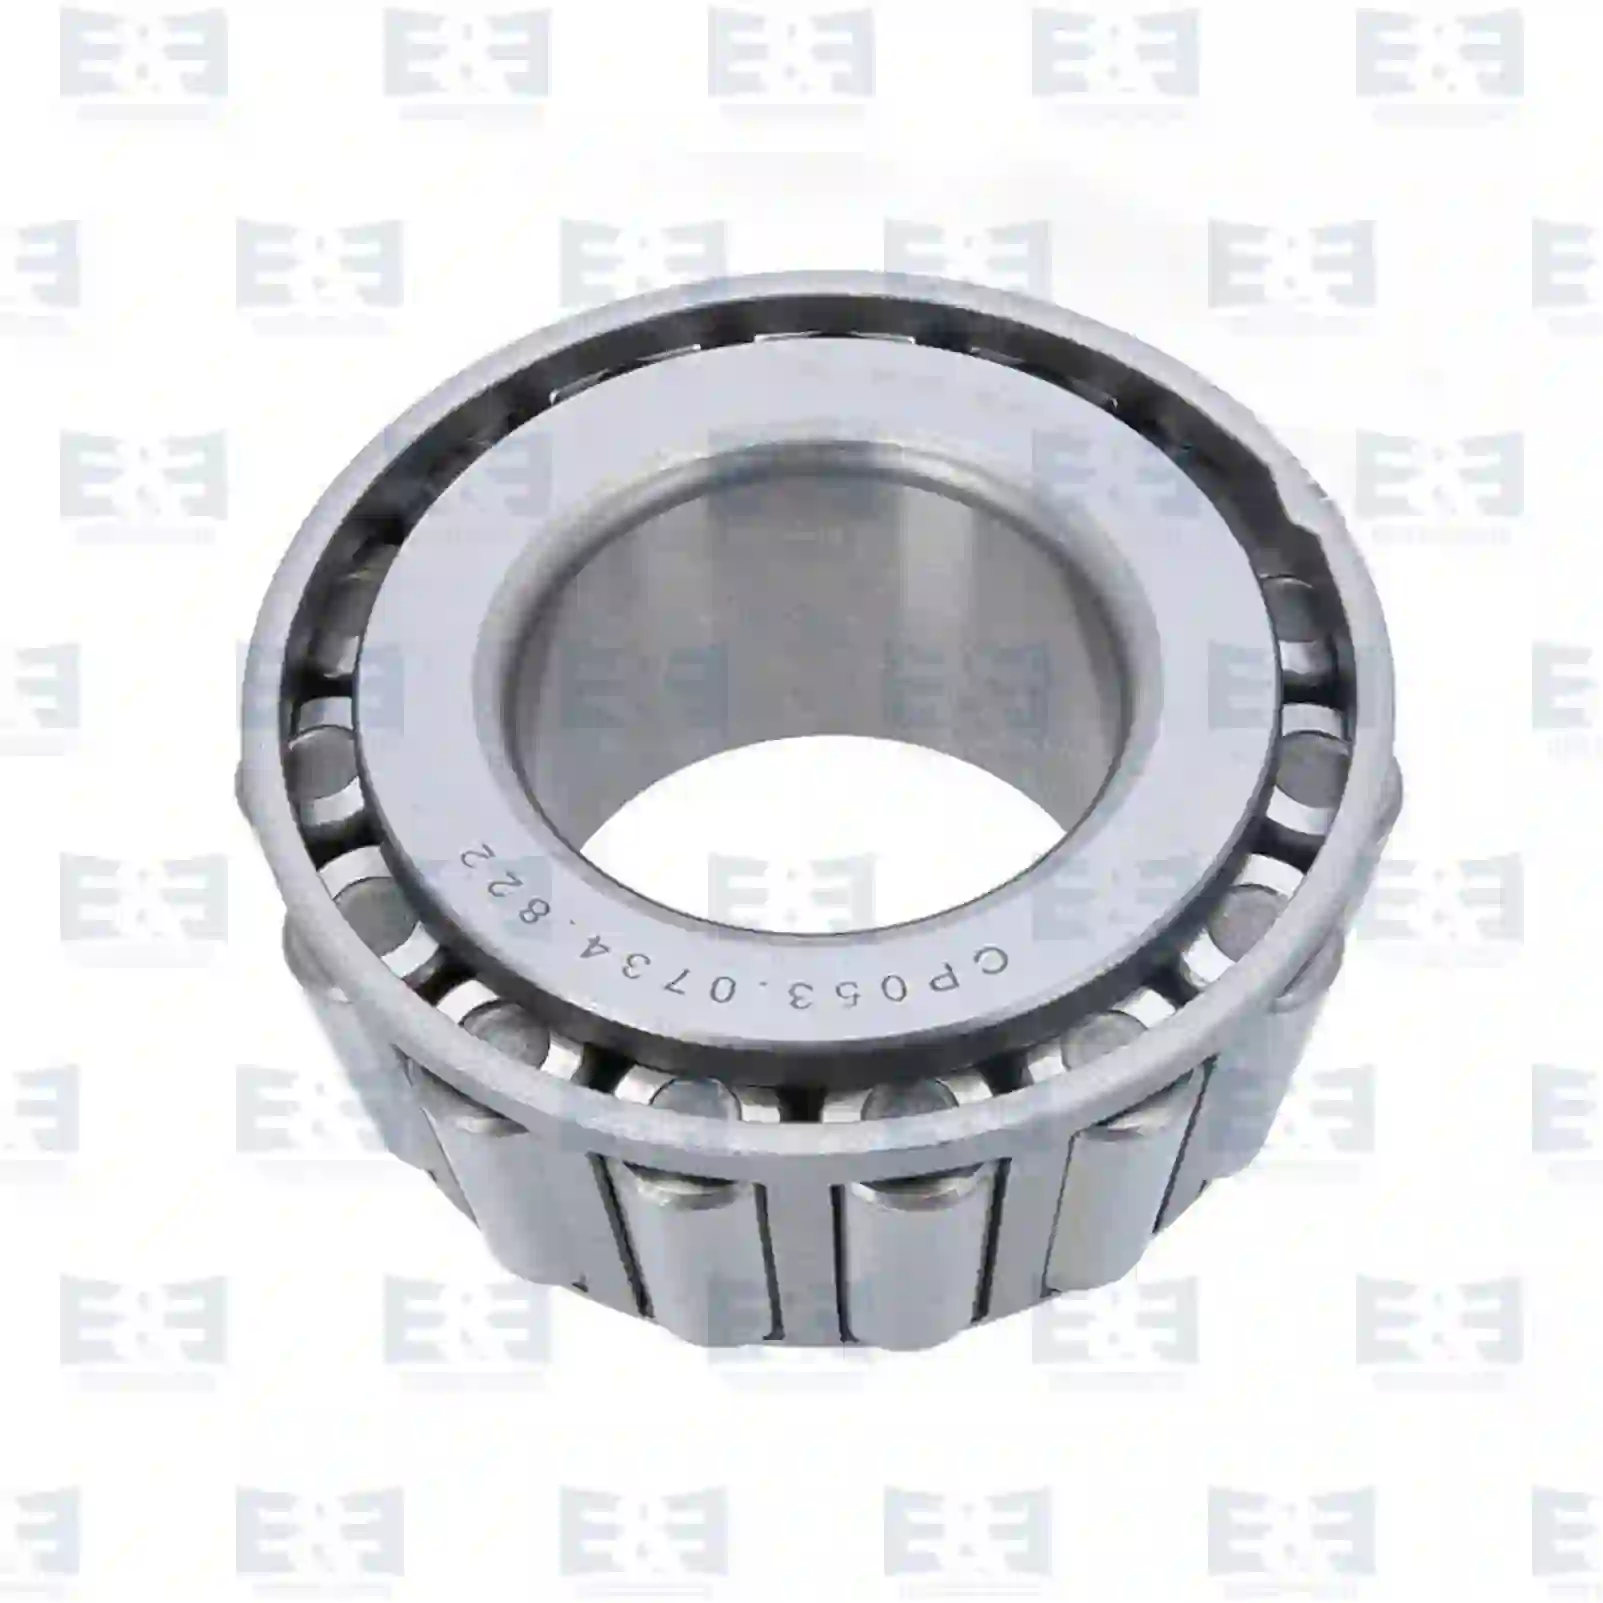  Cylinder roller bearing || E&E Truck Spare Parts | Truck Spare Parts, Auotomotive Spare Parts